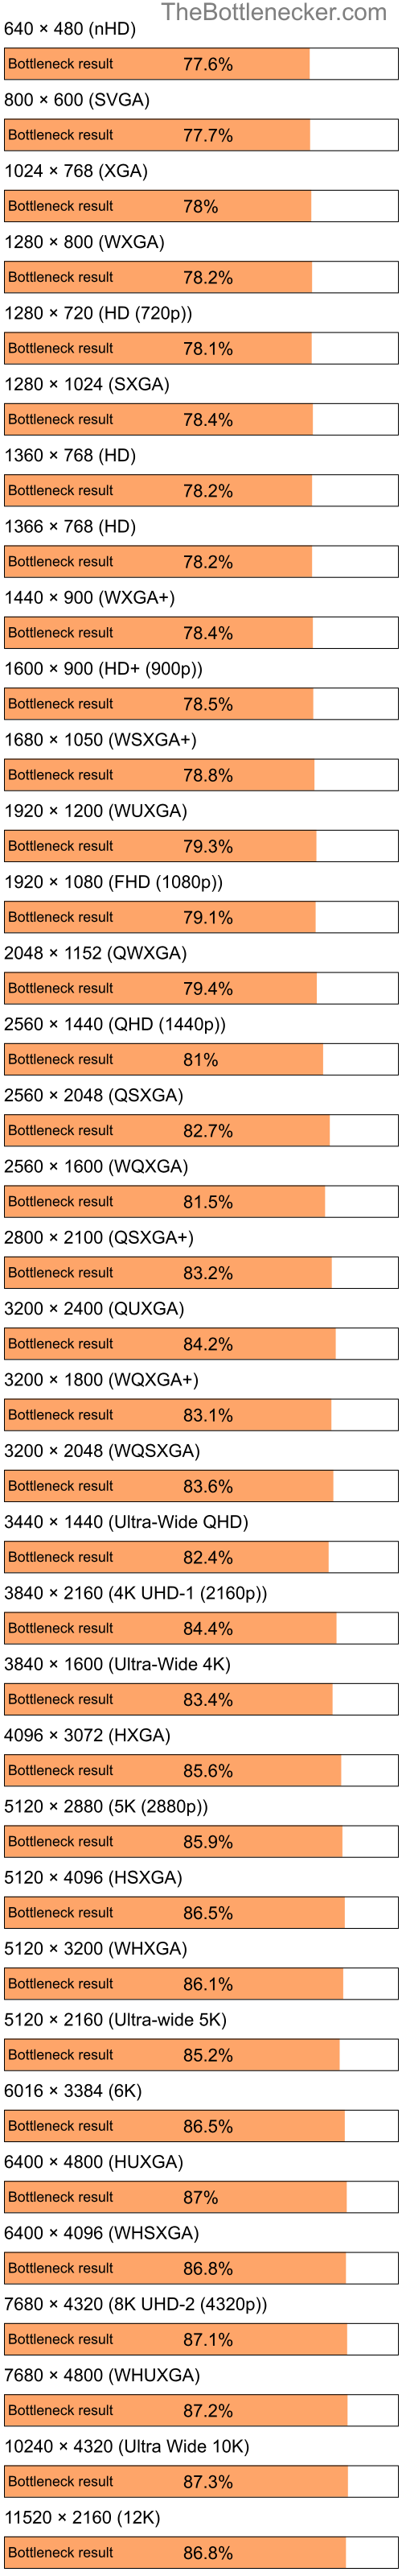 Bottleneck results by resolution for Intel Atom Z520 and AMD Mobility Radeon XPRESS 200 in General Tasks